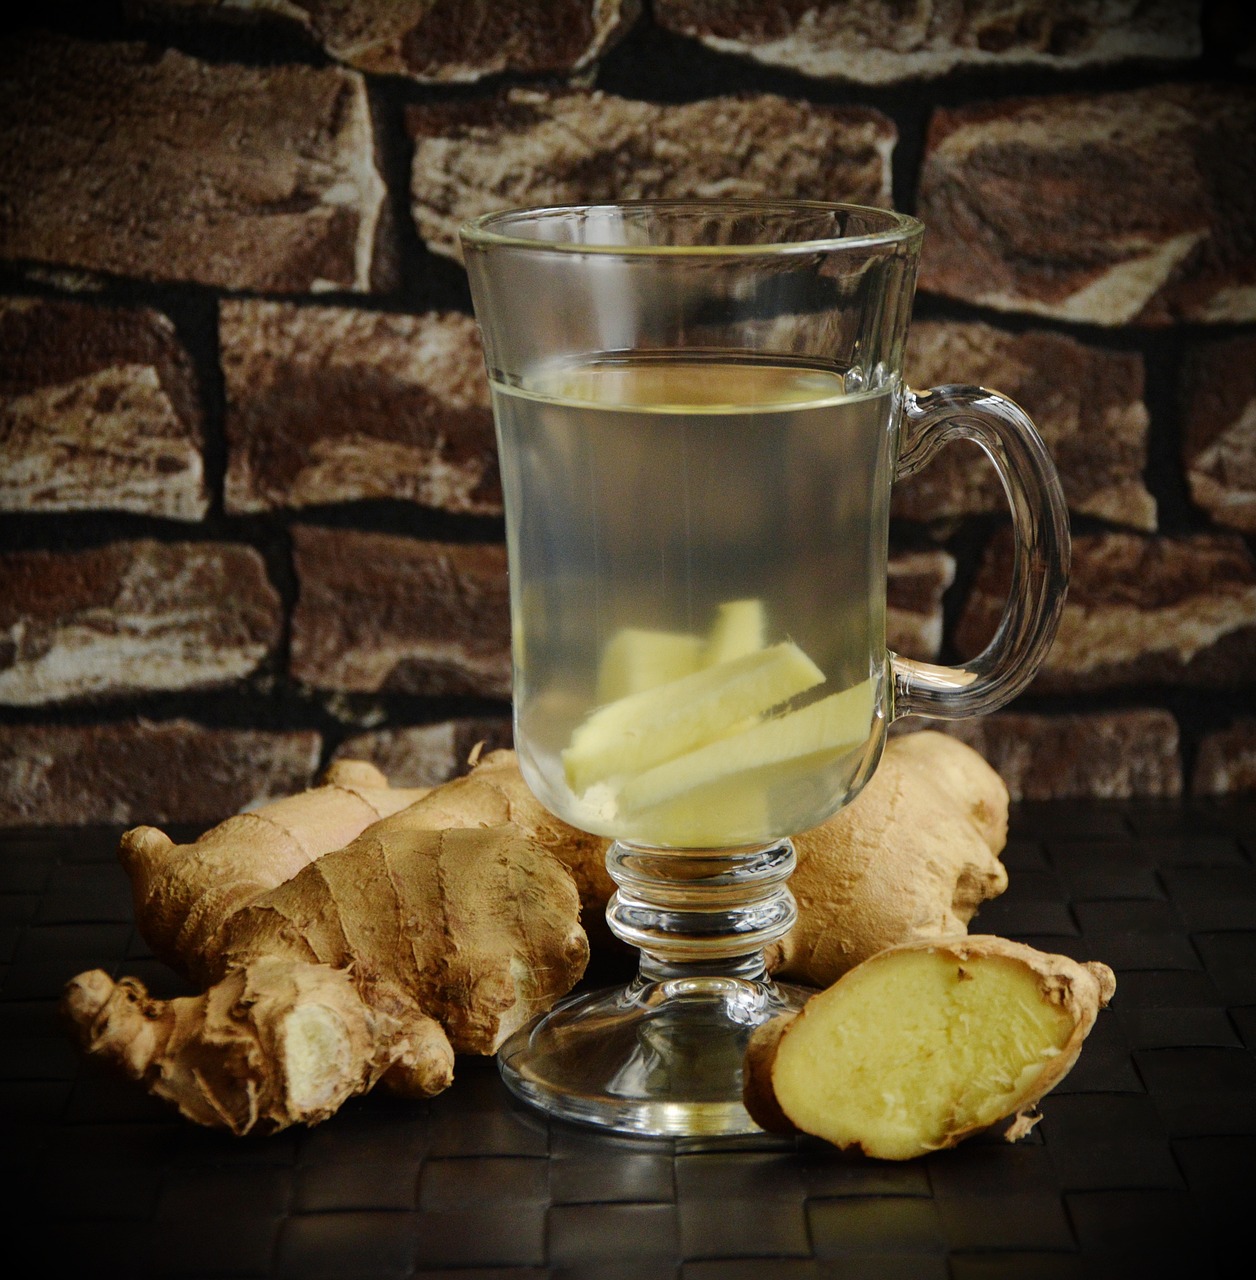 a cup of tea with a slice of ginger next to it, inspired by Wlodzimierz Tetmajer, pixabay, renaissance, absinthe, potato, fitness, jean paul gaultier